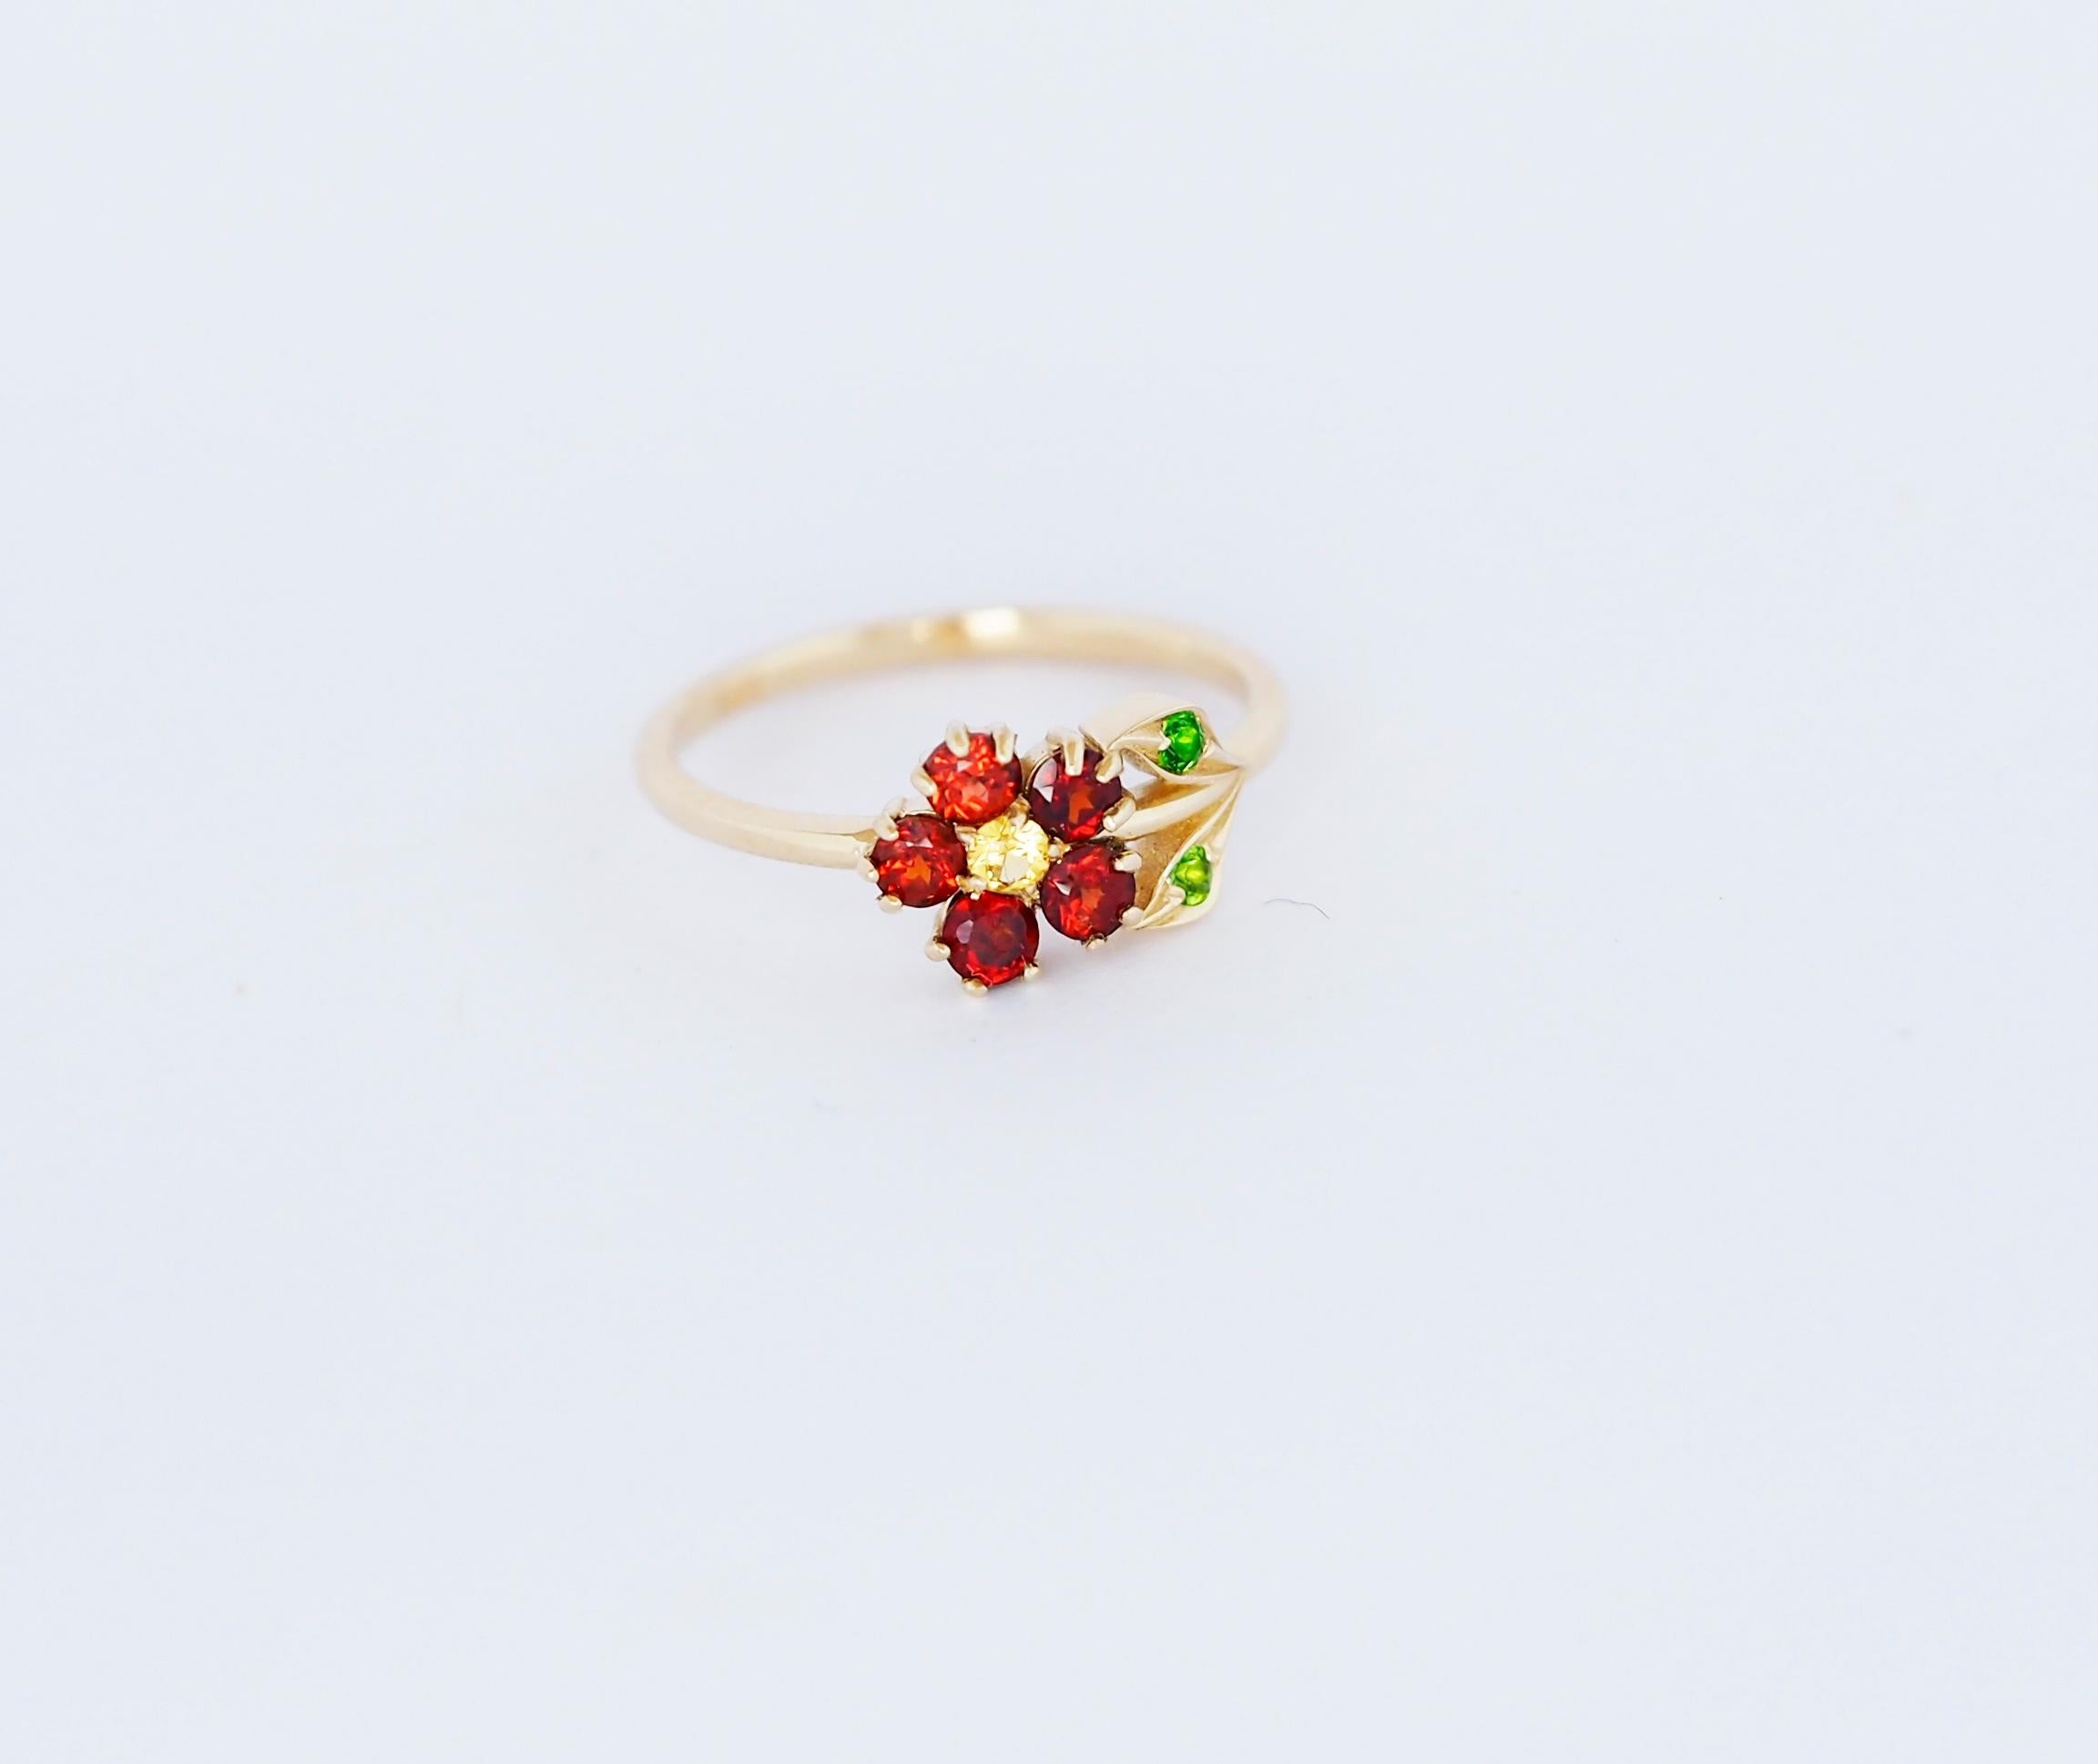 Modern Flower Ring in 14 Karat Gold, Sapphire, Garnet and Chrome Diopsides Ring.  For Sale